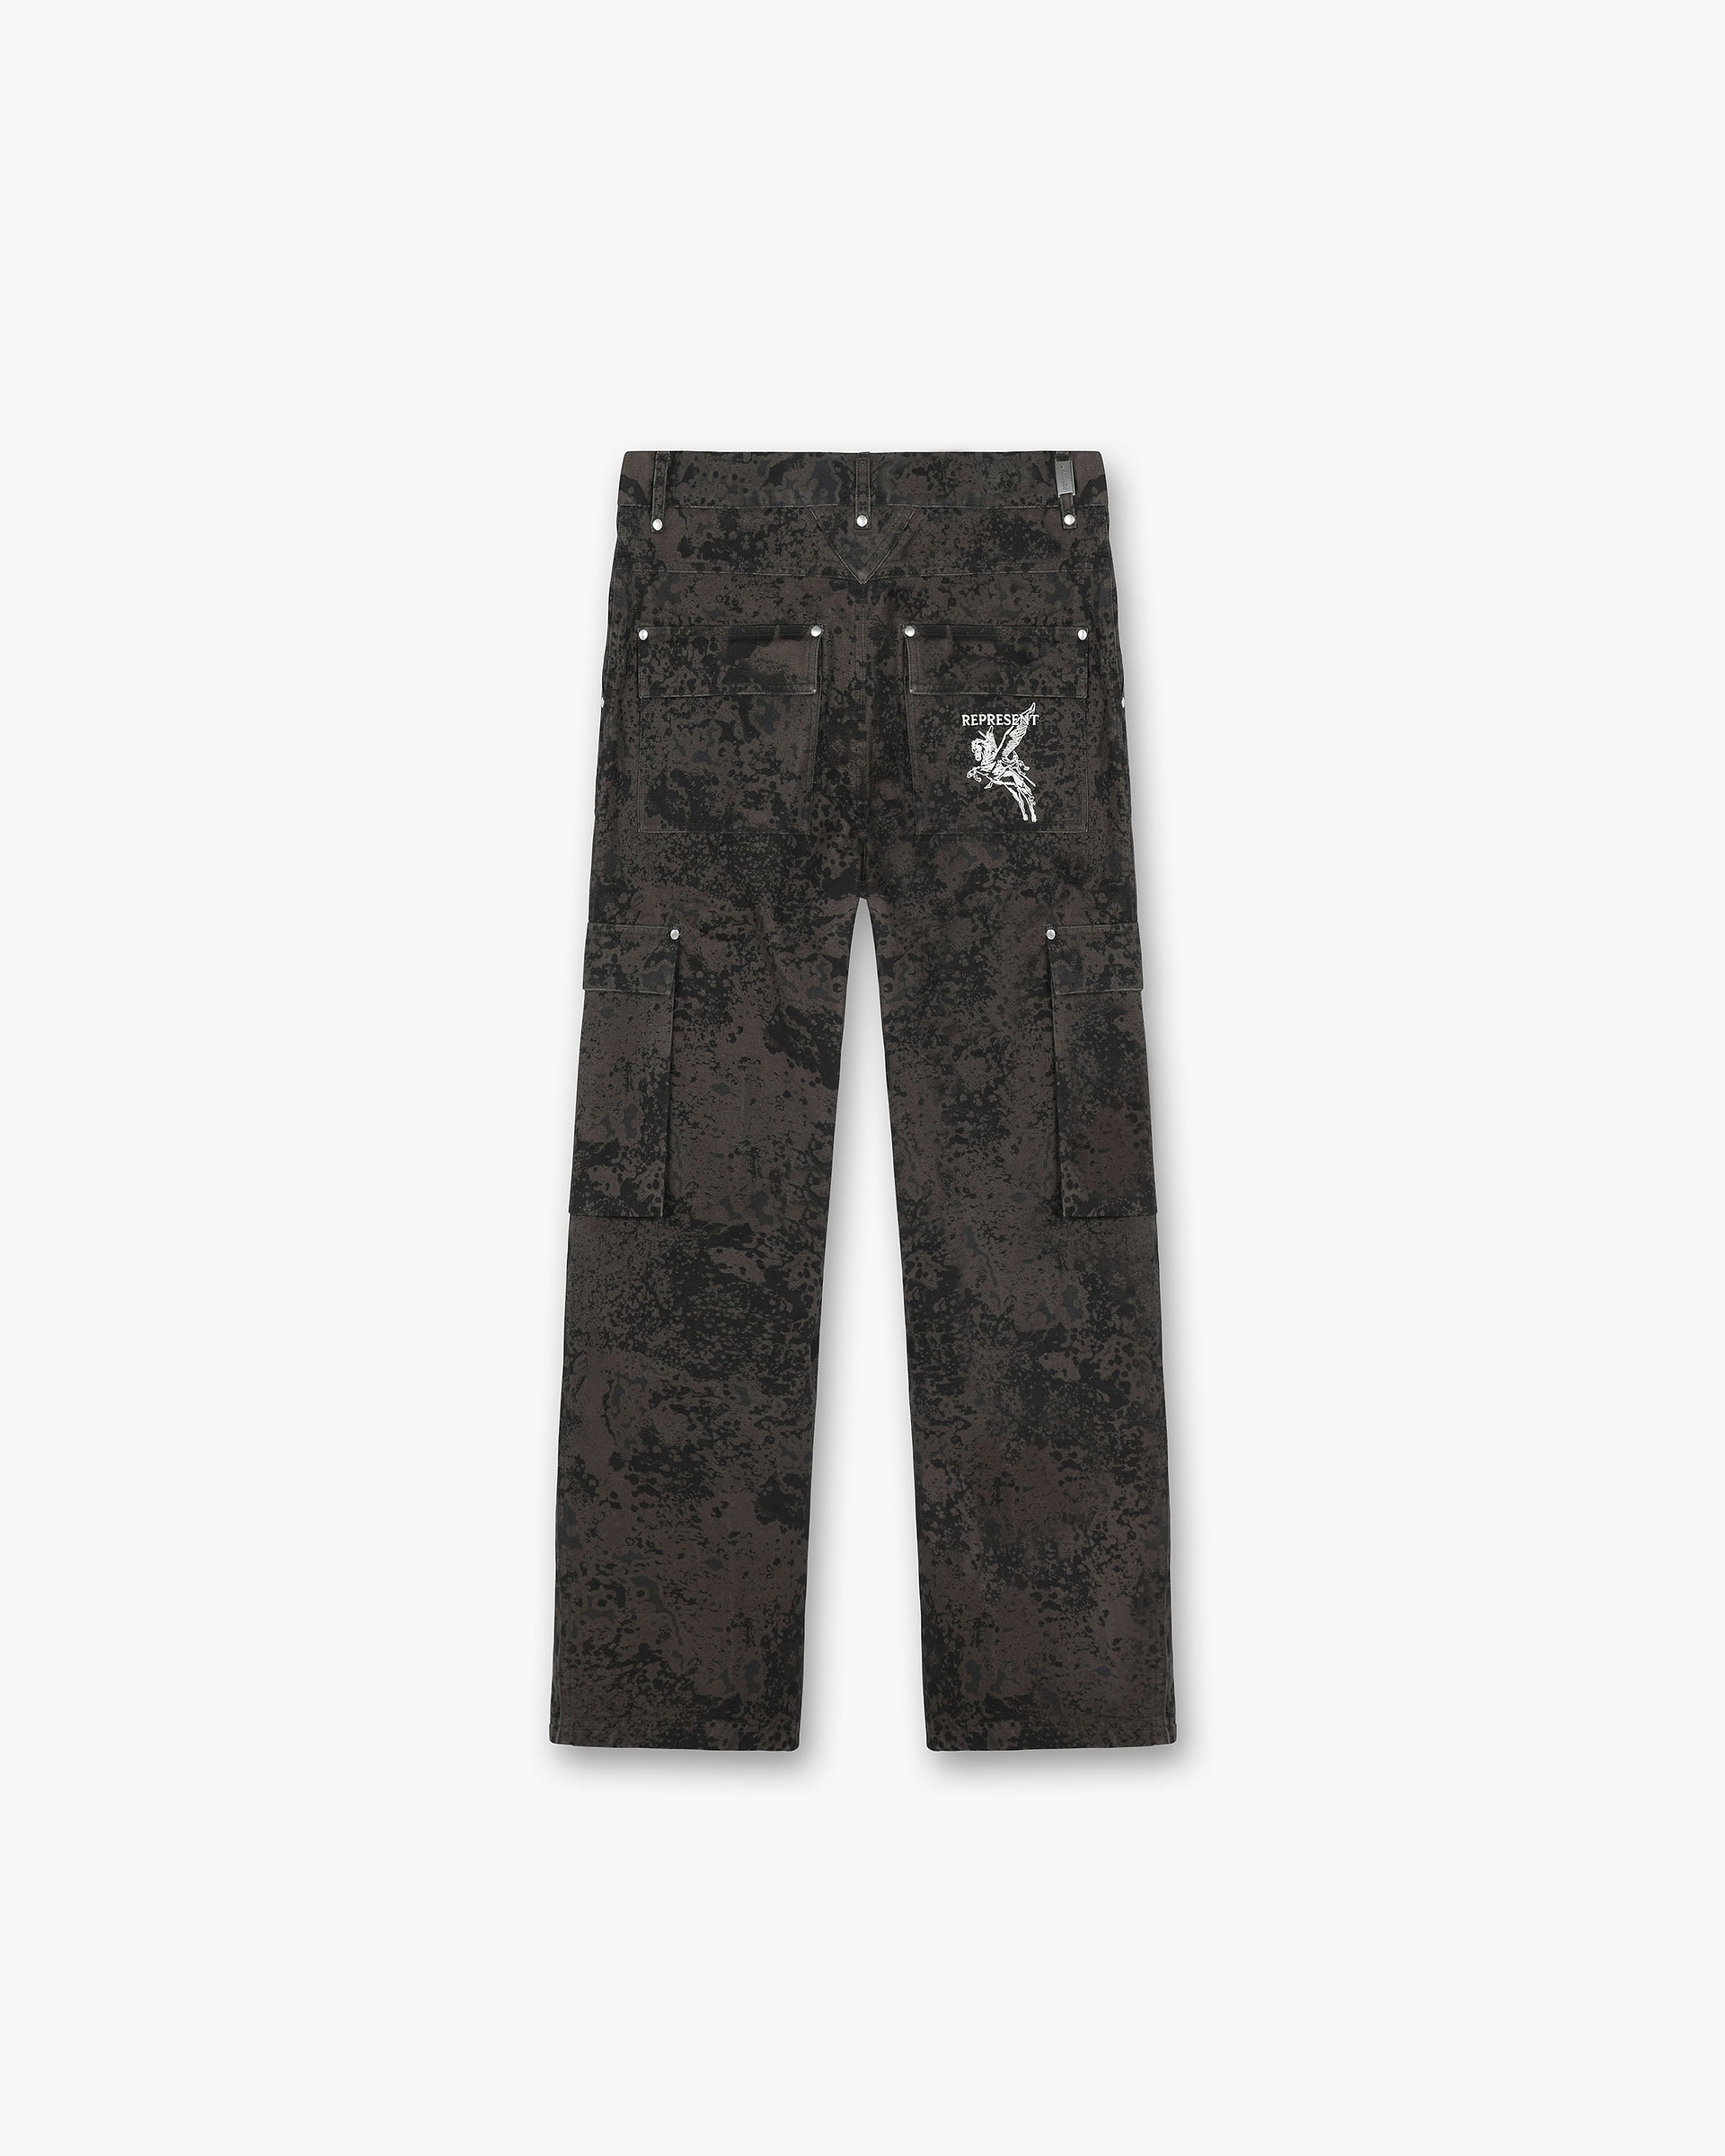 Top Of The Game Camo Cargo Pant - Grey/combo